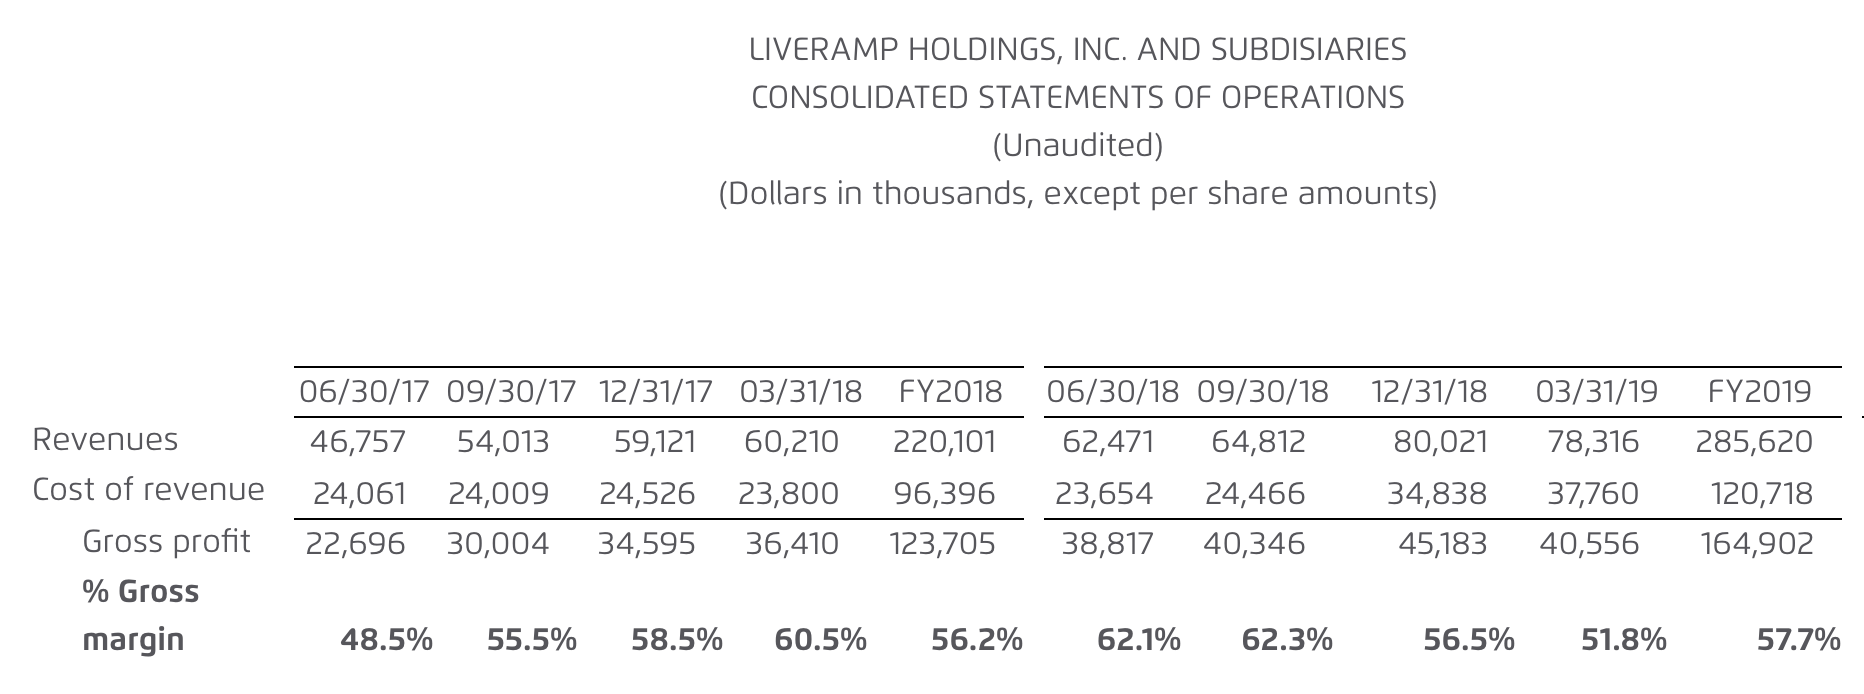 Table showing LiveRamp's gross margins, which were 56.2% in FY2018 and 57.7% in FY2019